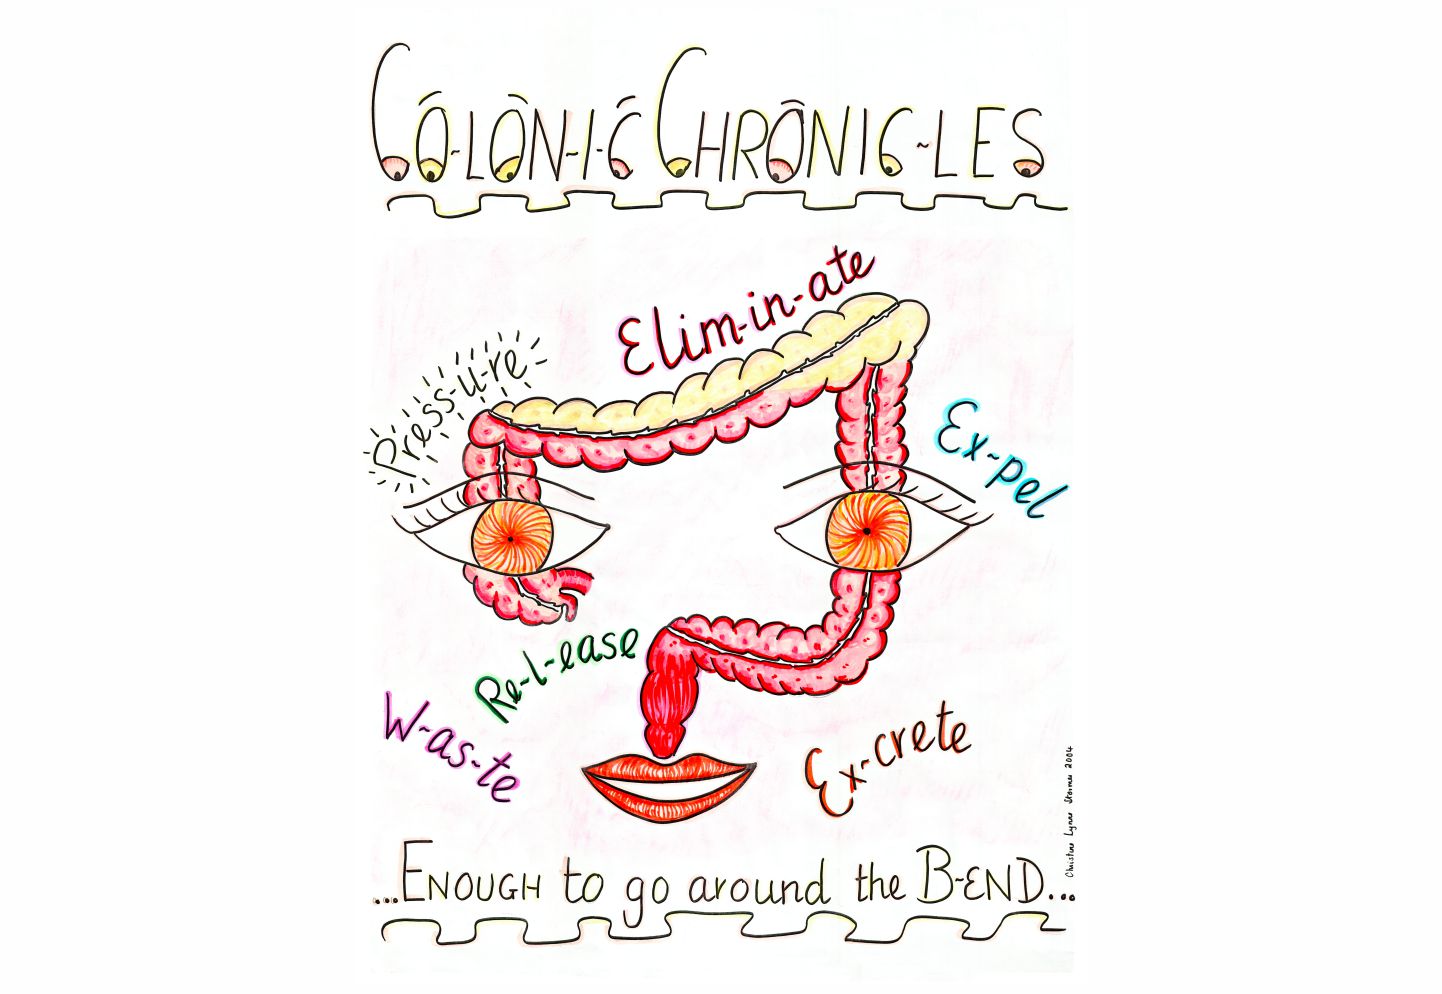 3 Colonic Chronicles